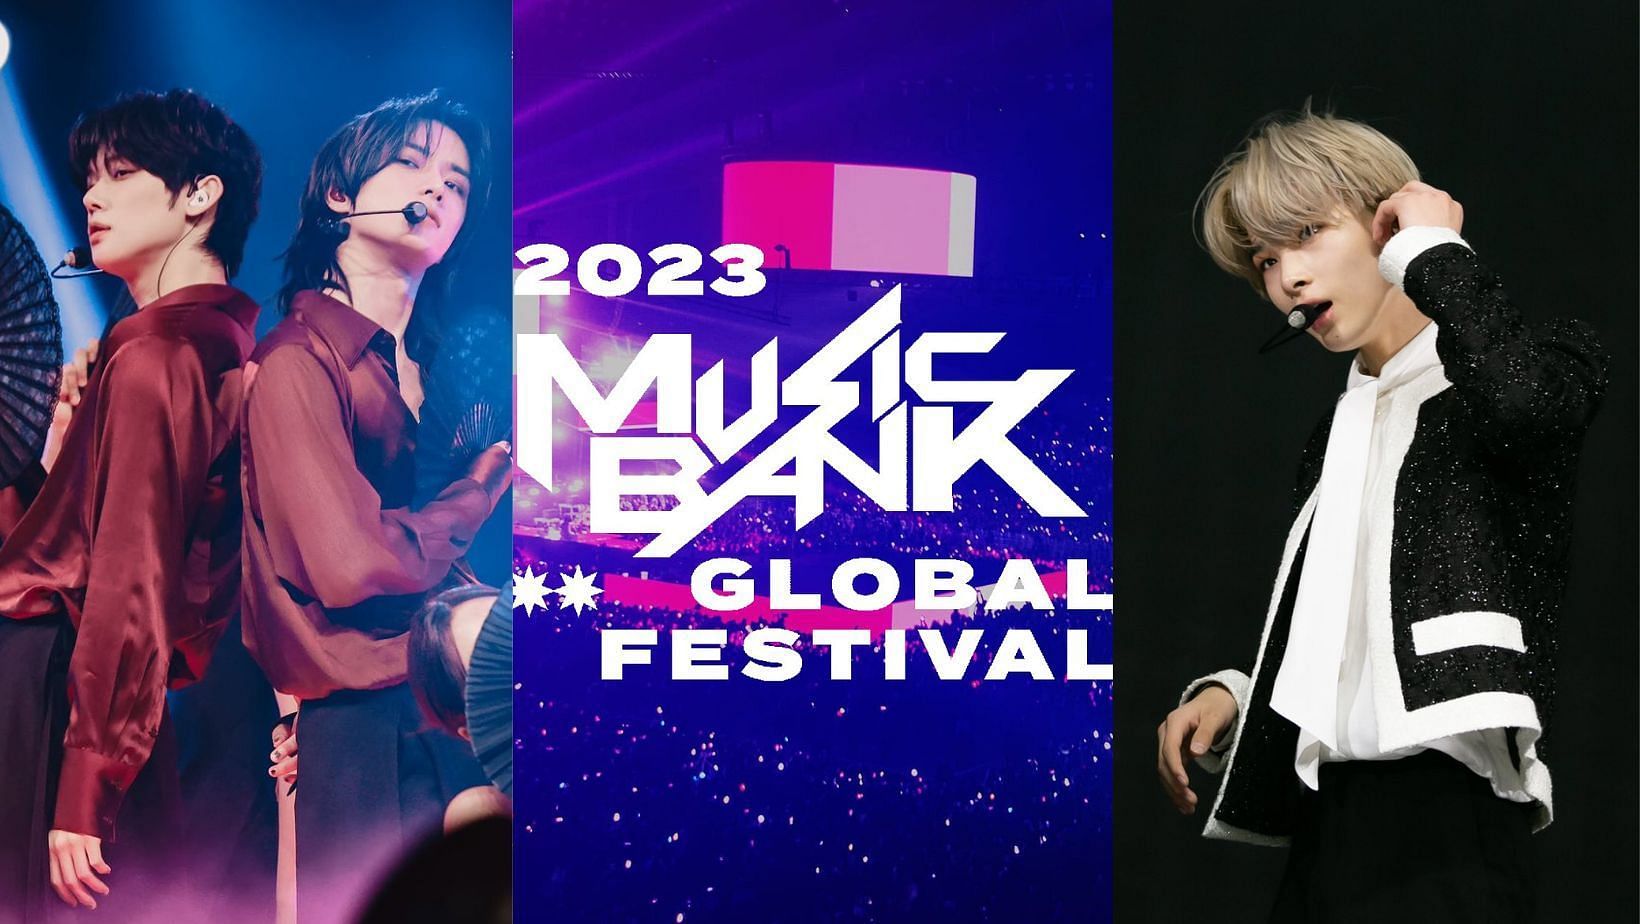 Where to stream the 2023 Music Bank Global Festival online? Special